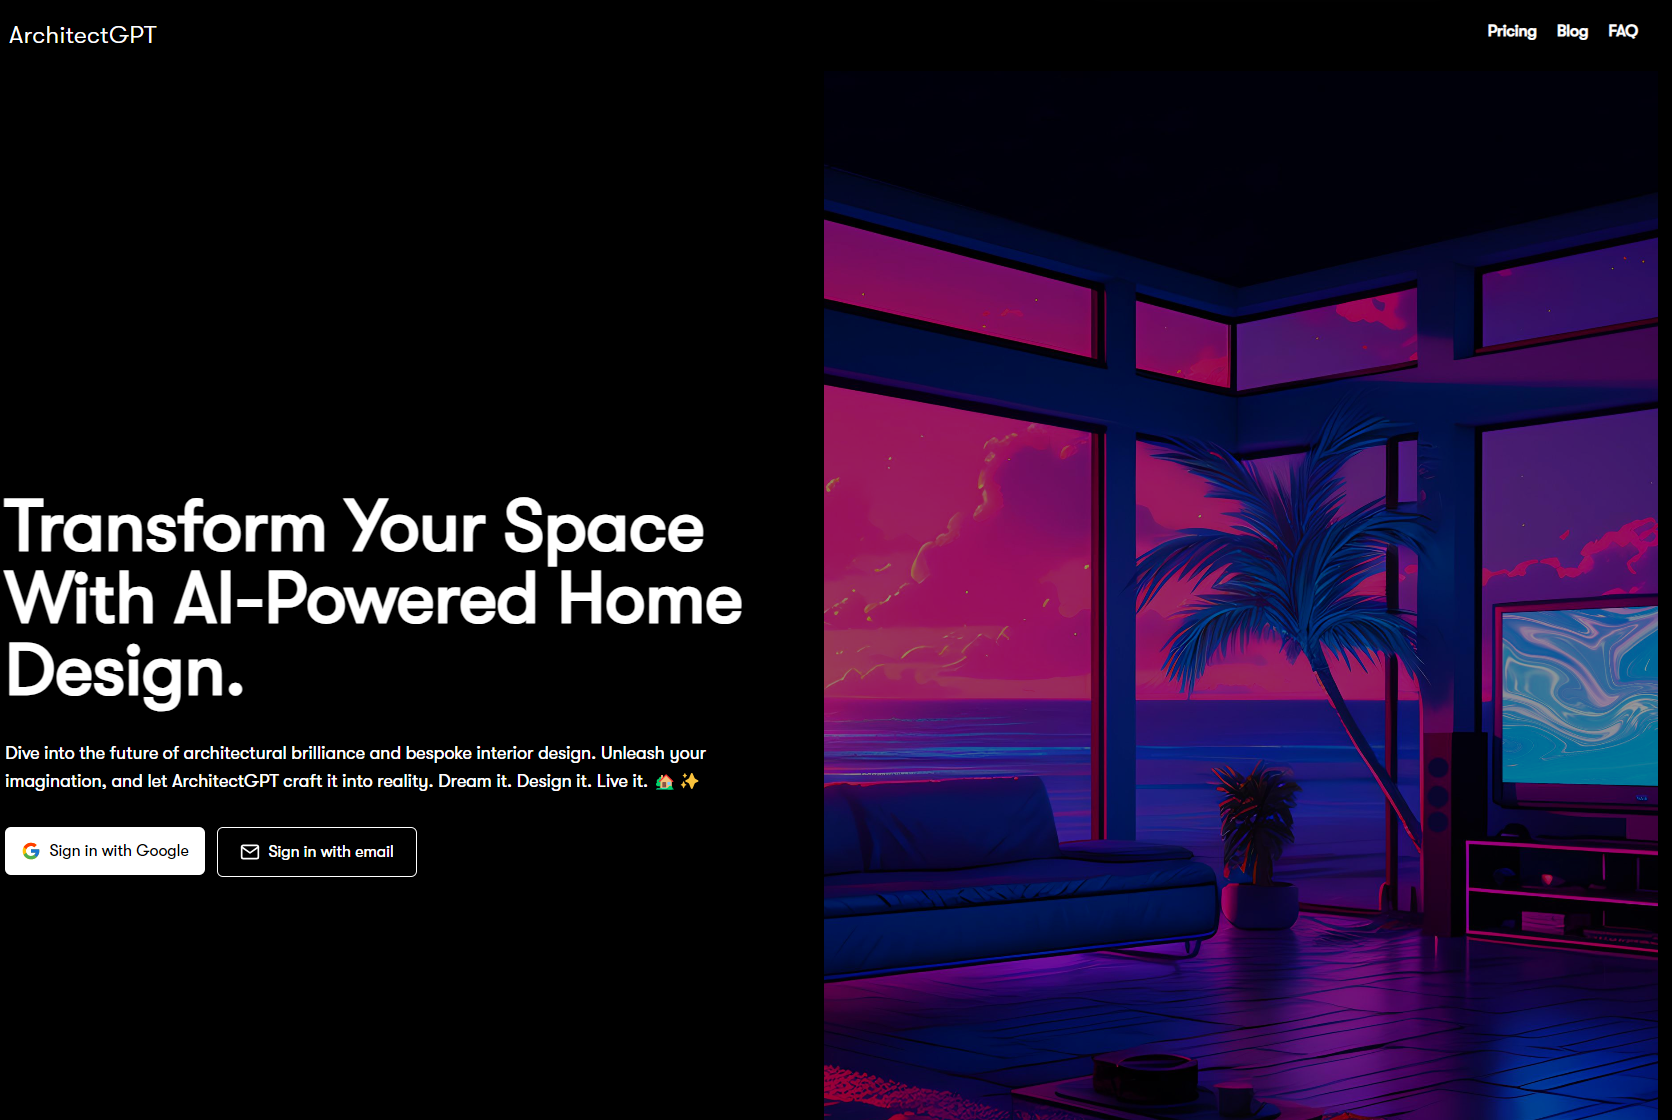 ArchitectGPT transform your space with ai-powered home design